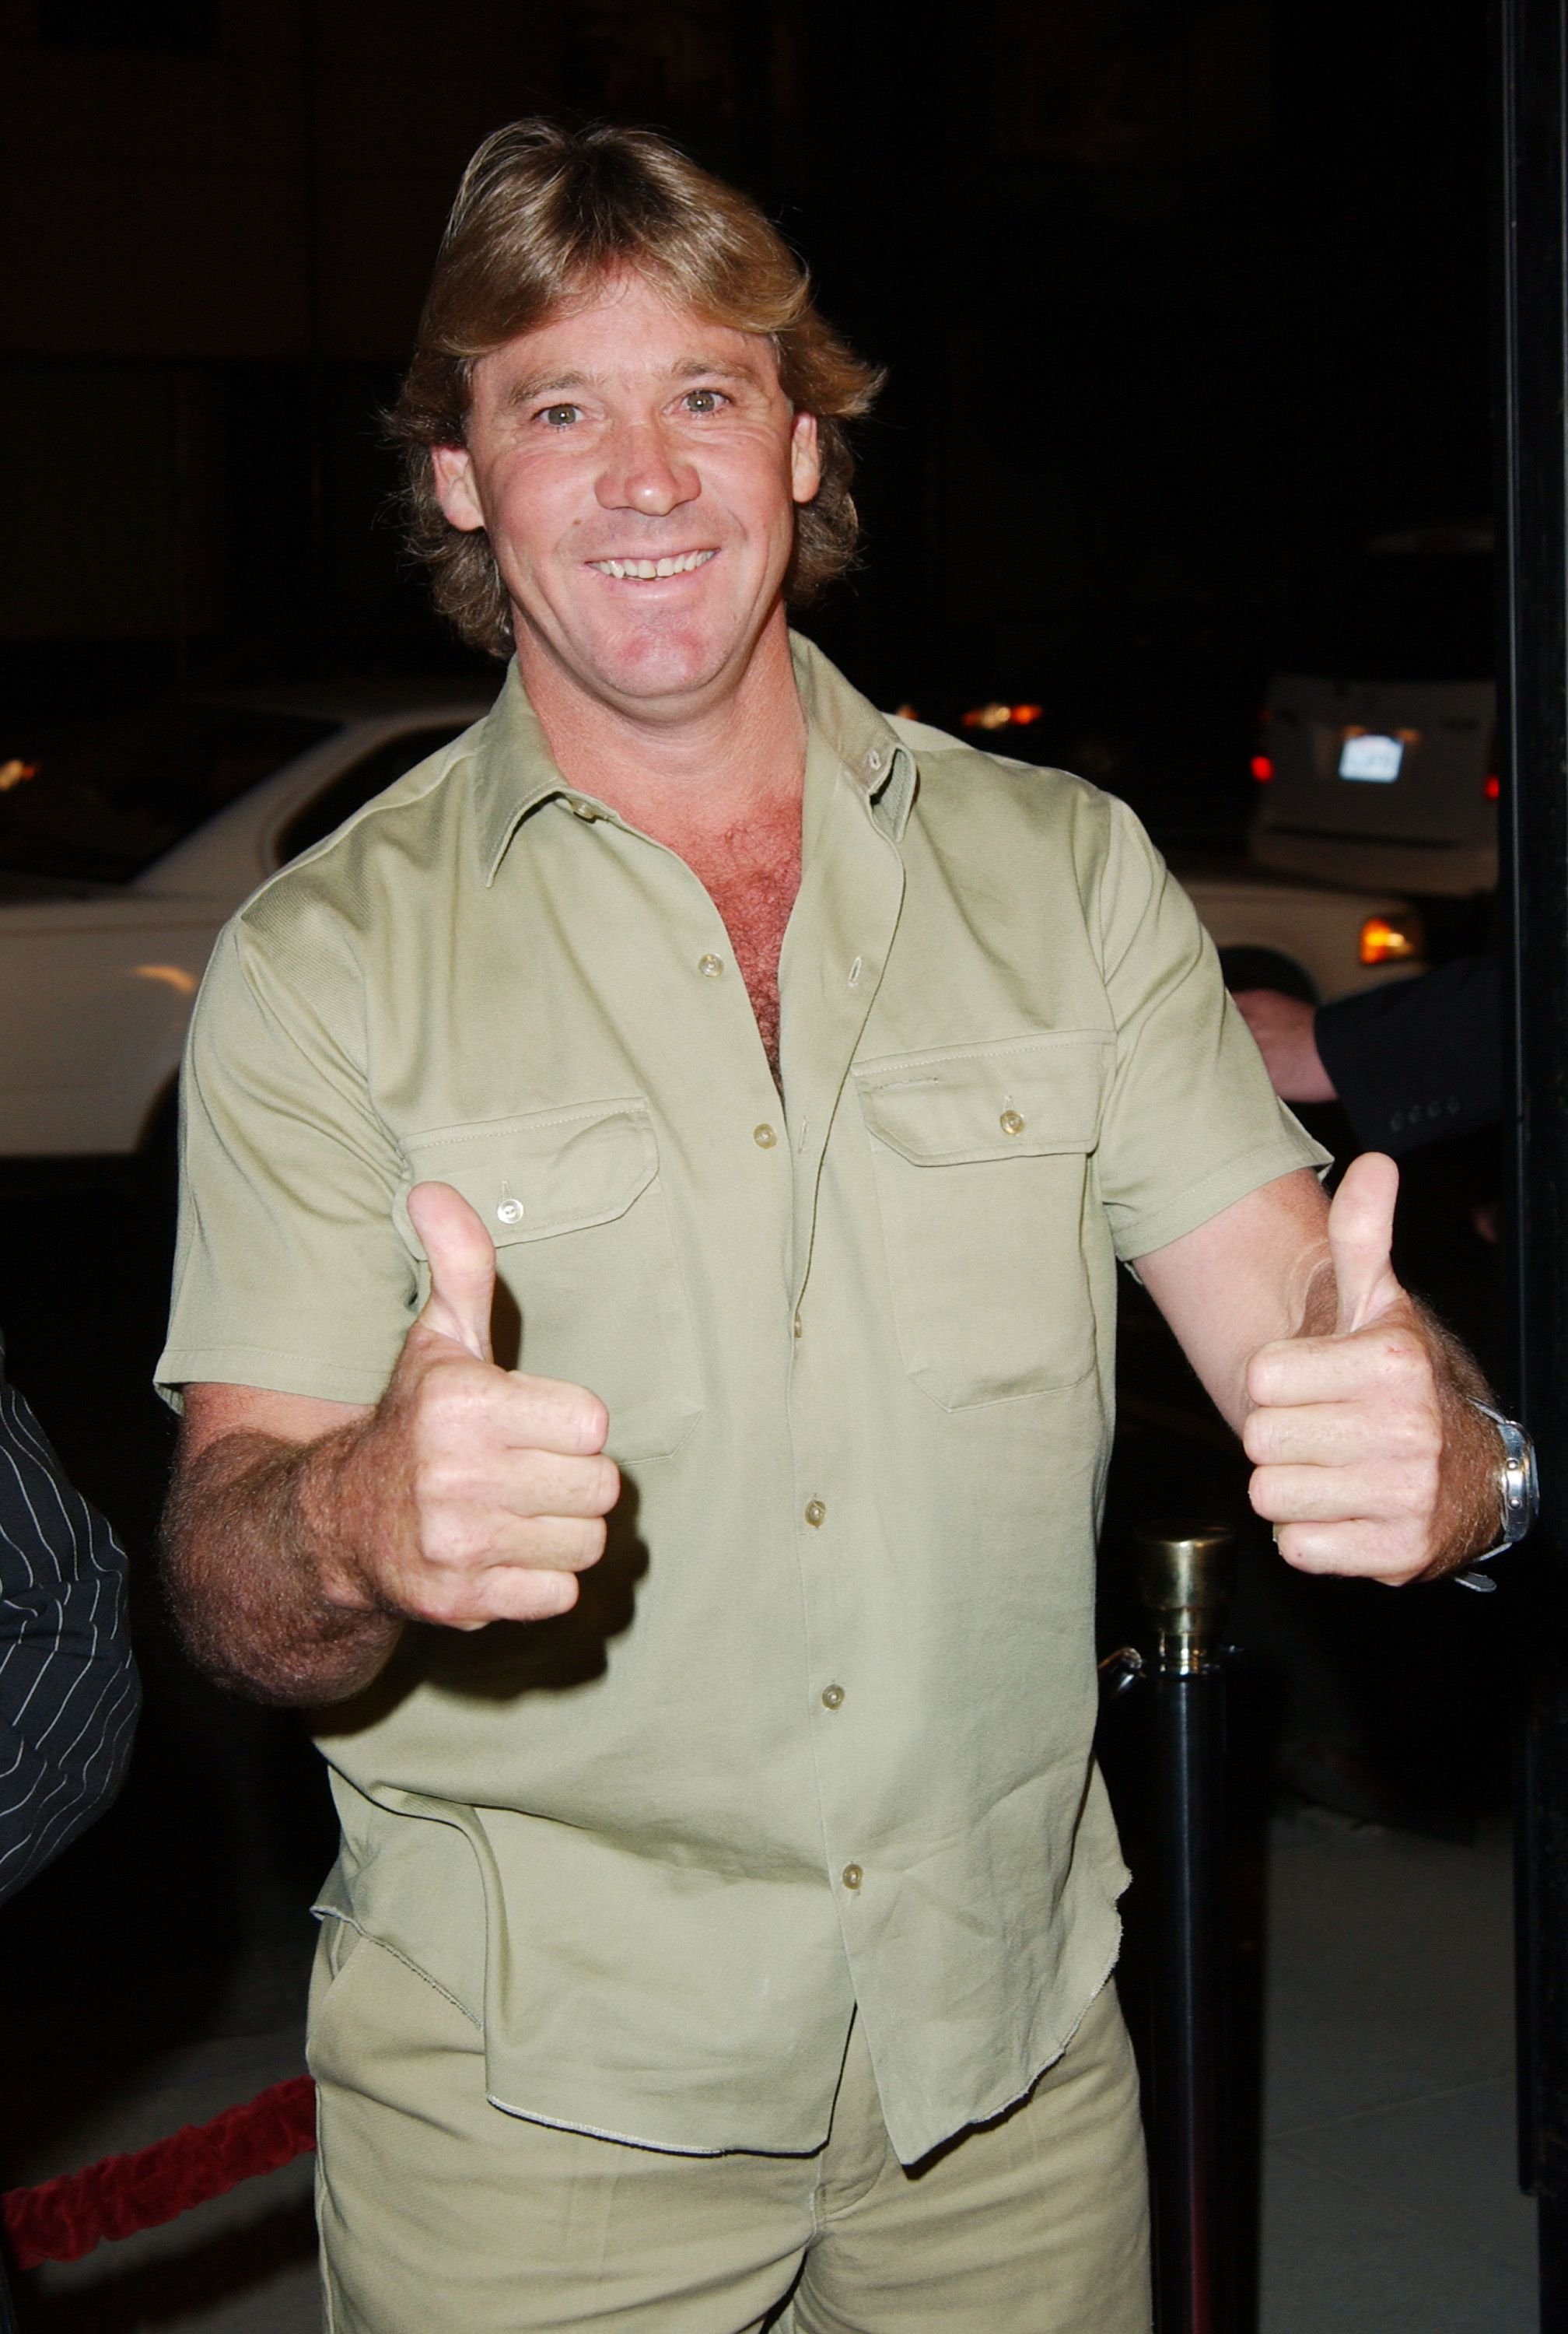 Steve Irwin during "Master And Commander: The Far Side Of The World" - Los Angeles Premiere in Beverly Hills, California | Photo: Jon Kopaloff/FilmMagic/Getty Images